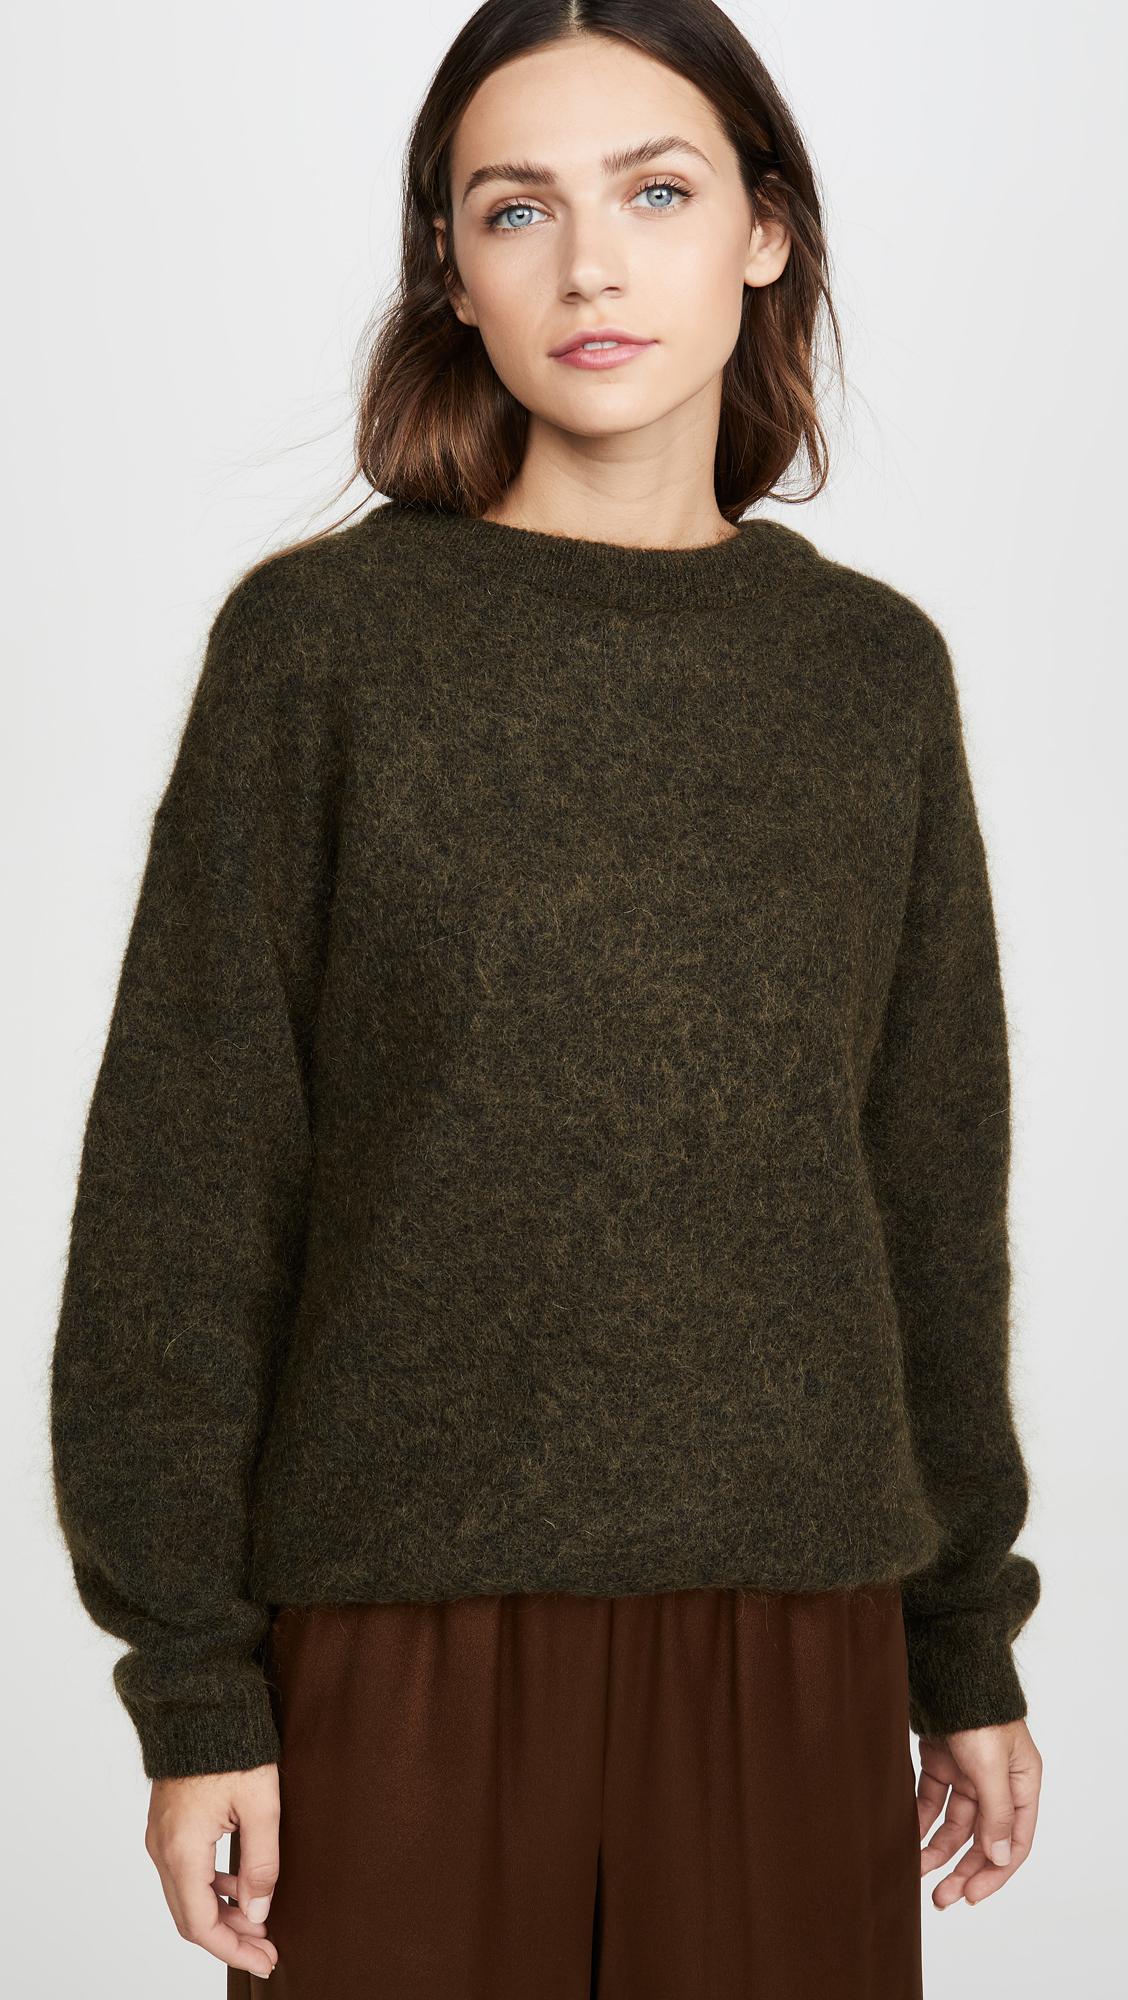 Acne Studios Synthetic Dramatic Mohair Sweater in Olive Green (Green) - Lyst